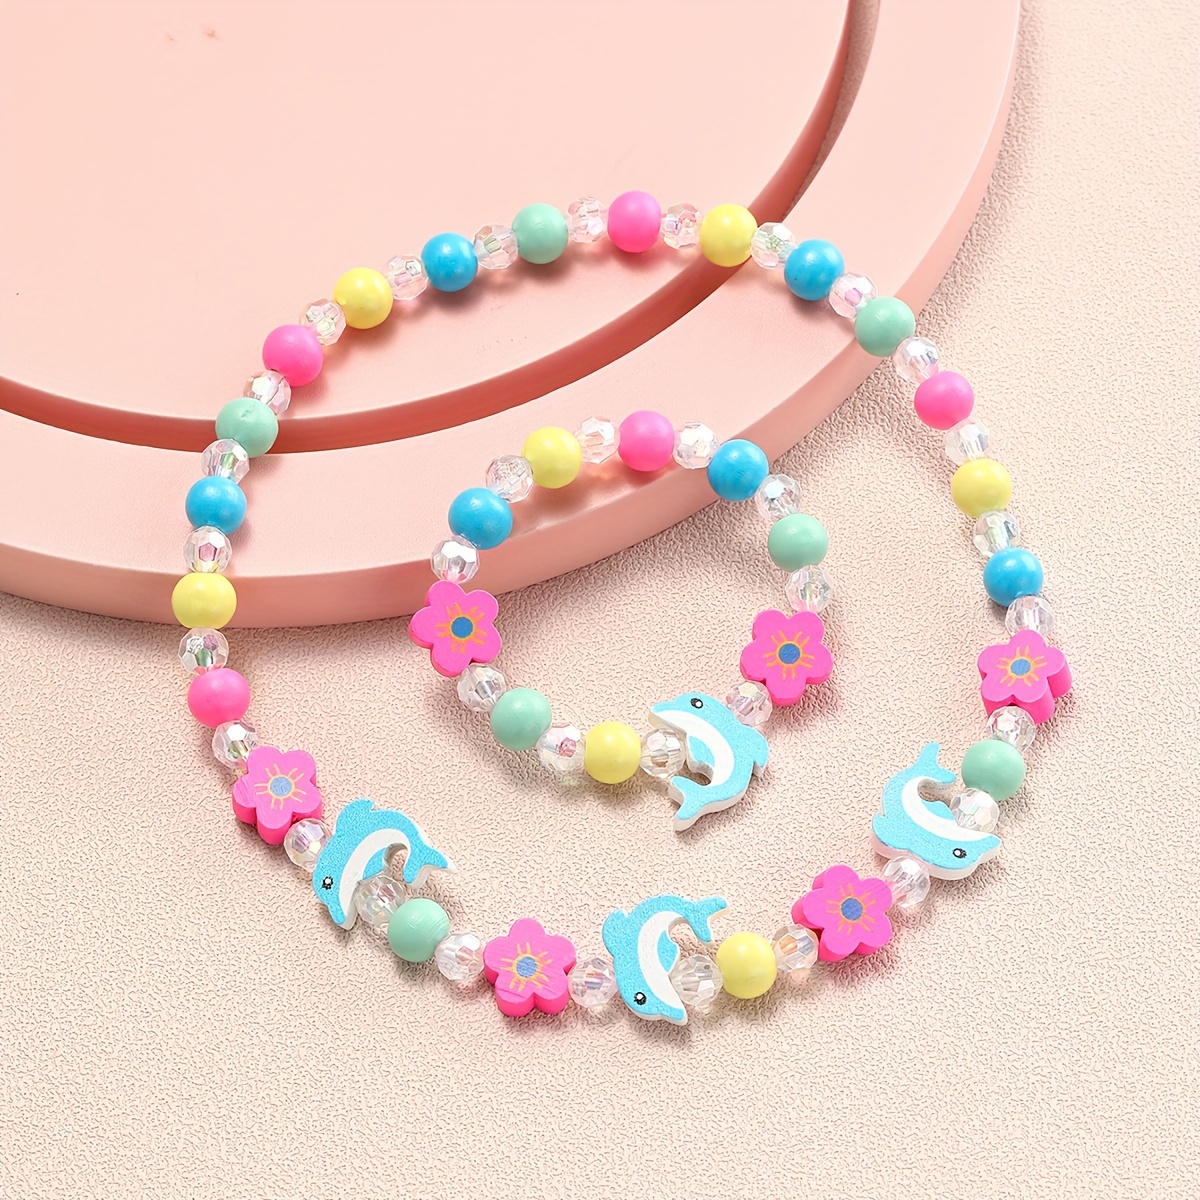 

2pcs Colorful Beaded Bracelet And Necklace Set, Wooden Beads With Unicorn/etc Charms, Girls' Jewelry, Kids' Party Favors, Play Dress-up Accessories